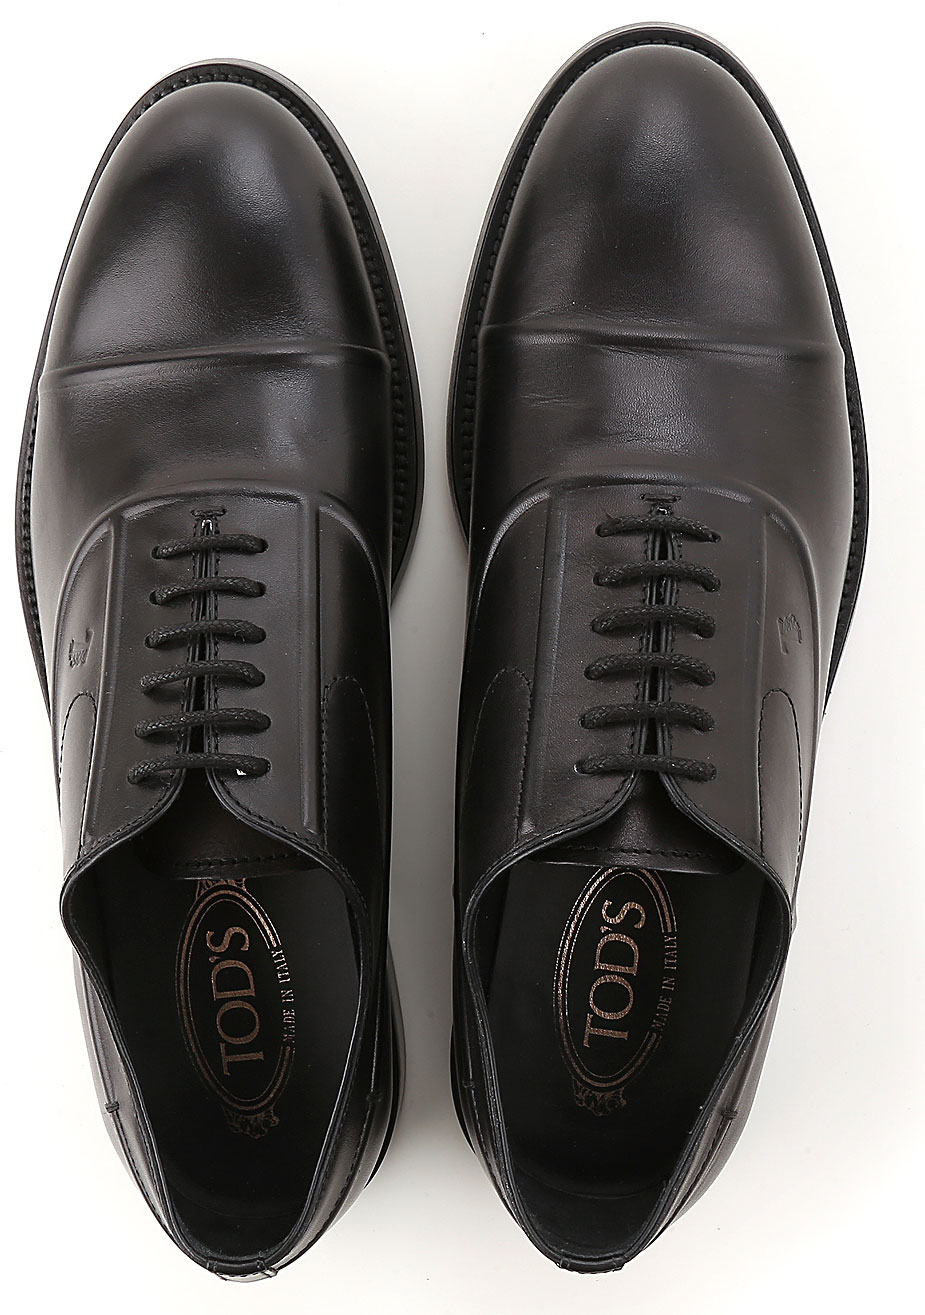 Mens Shoes Tods, Style code: m0xr0u670d90b999--